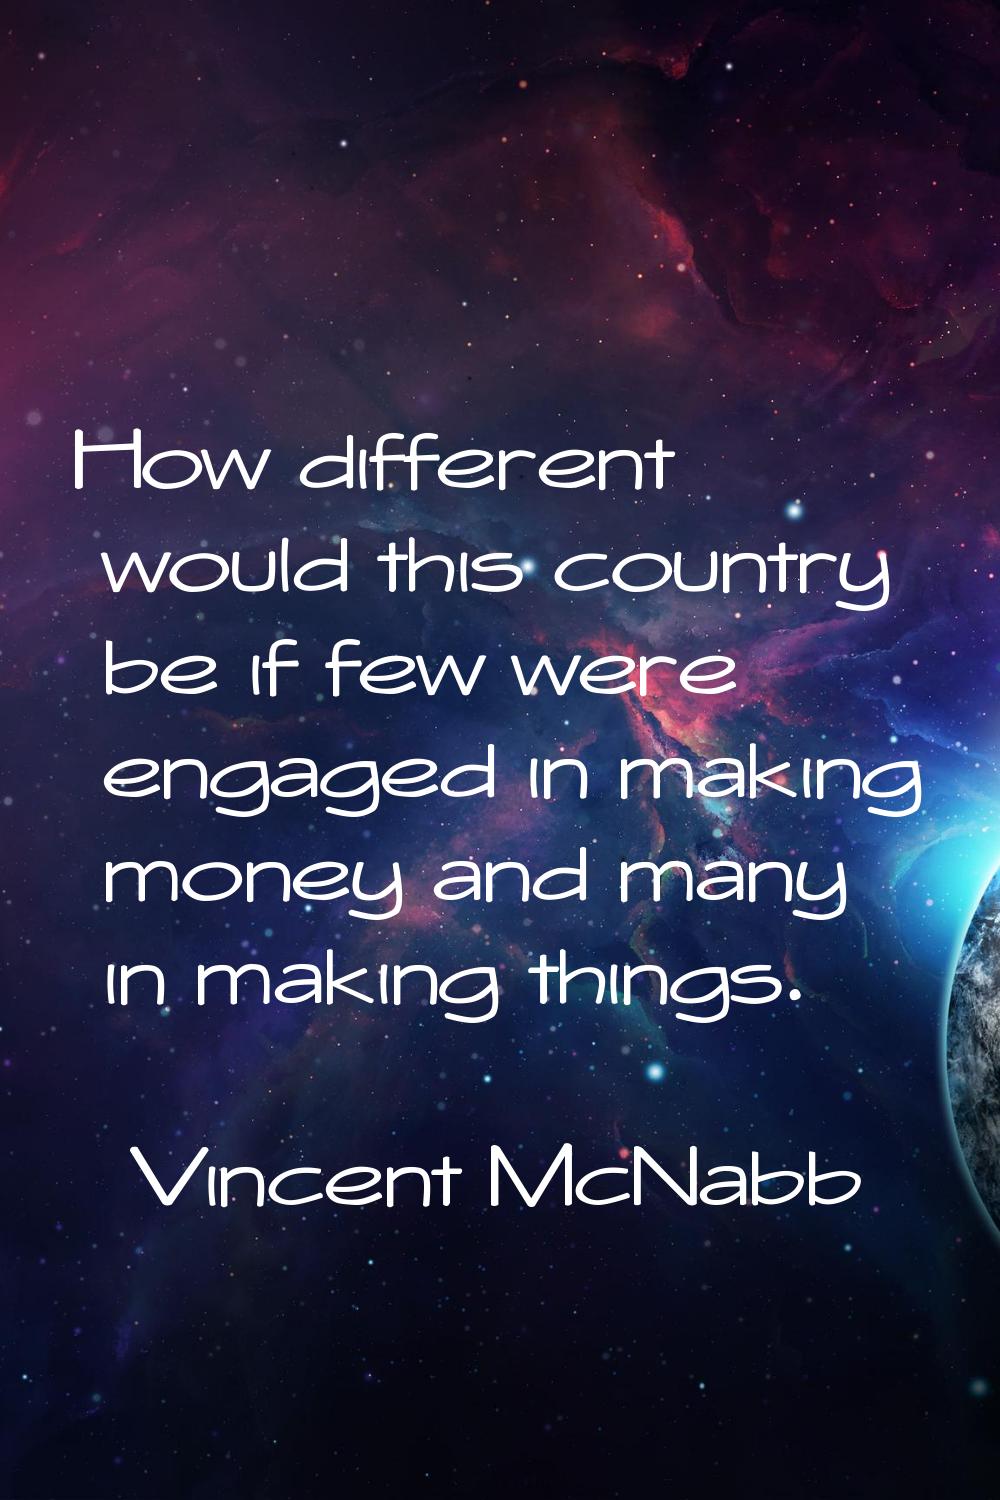 How different would this country be if few were engaged in making money and many in making things.